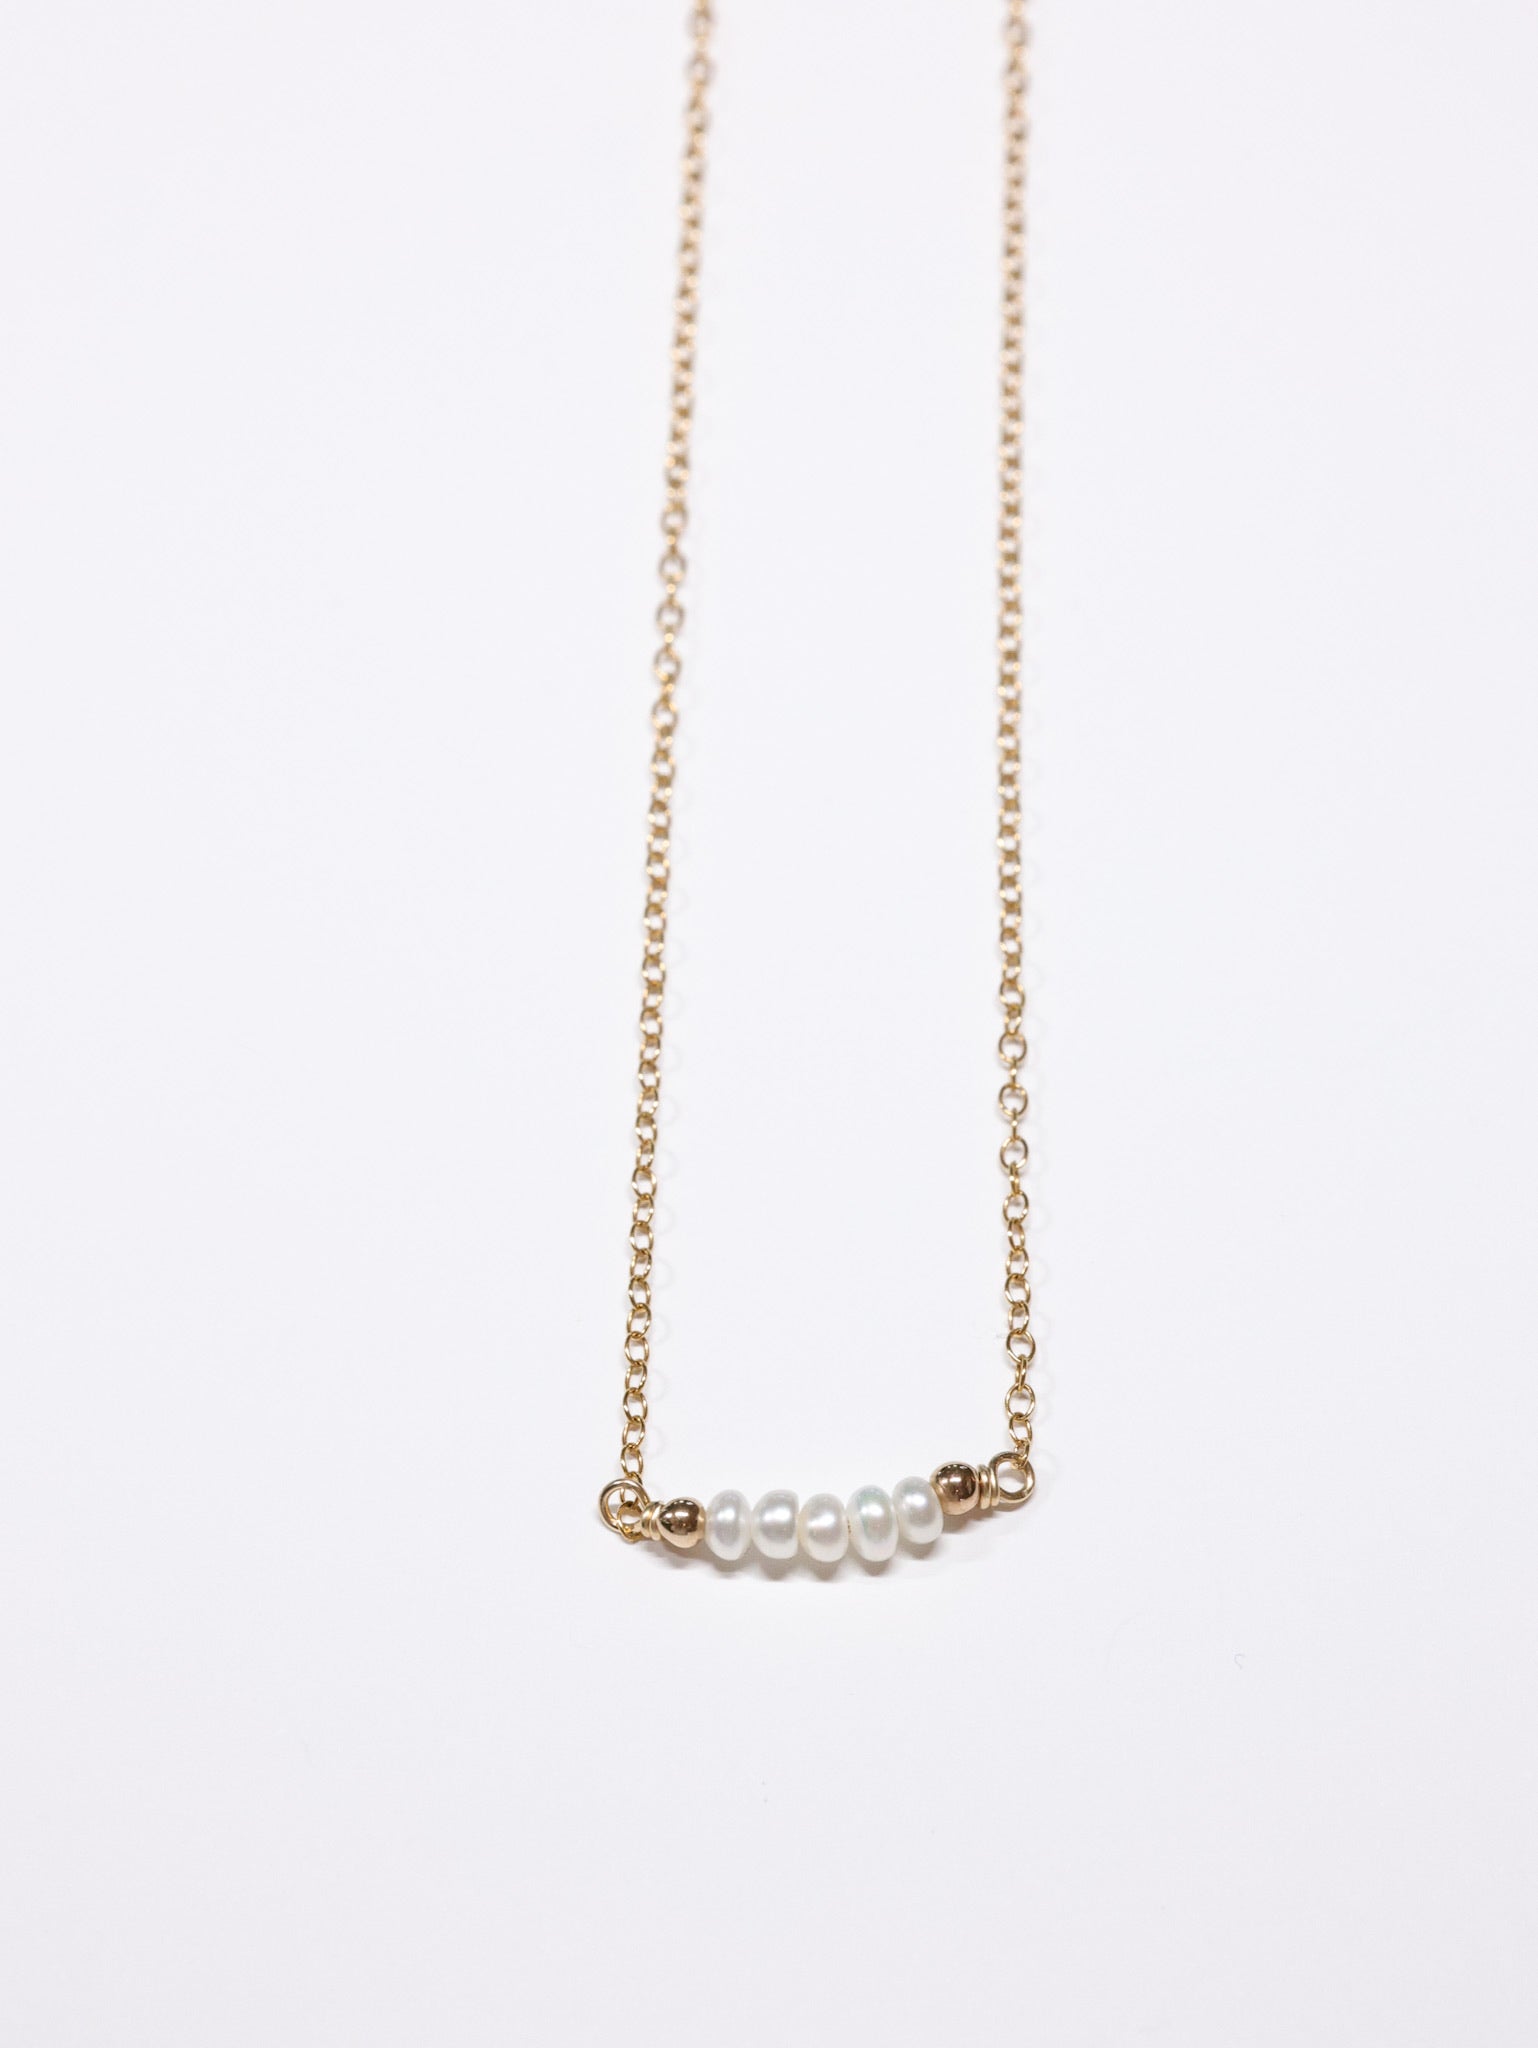 5 Tiny Pearls nh Necklace -gold filled